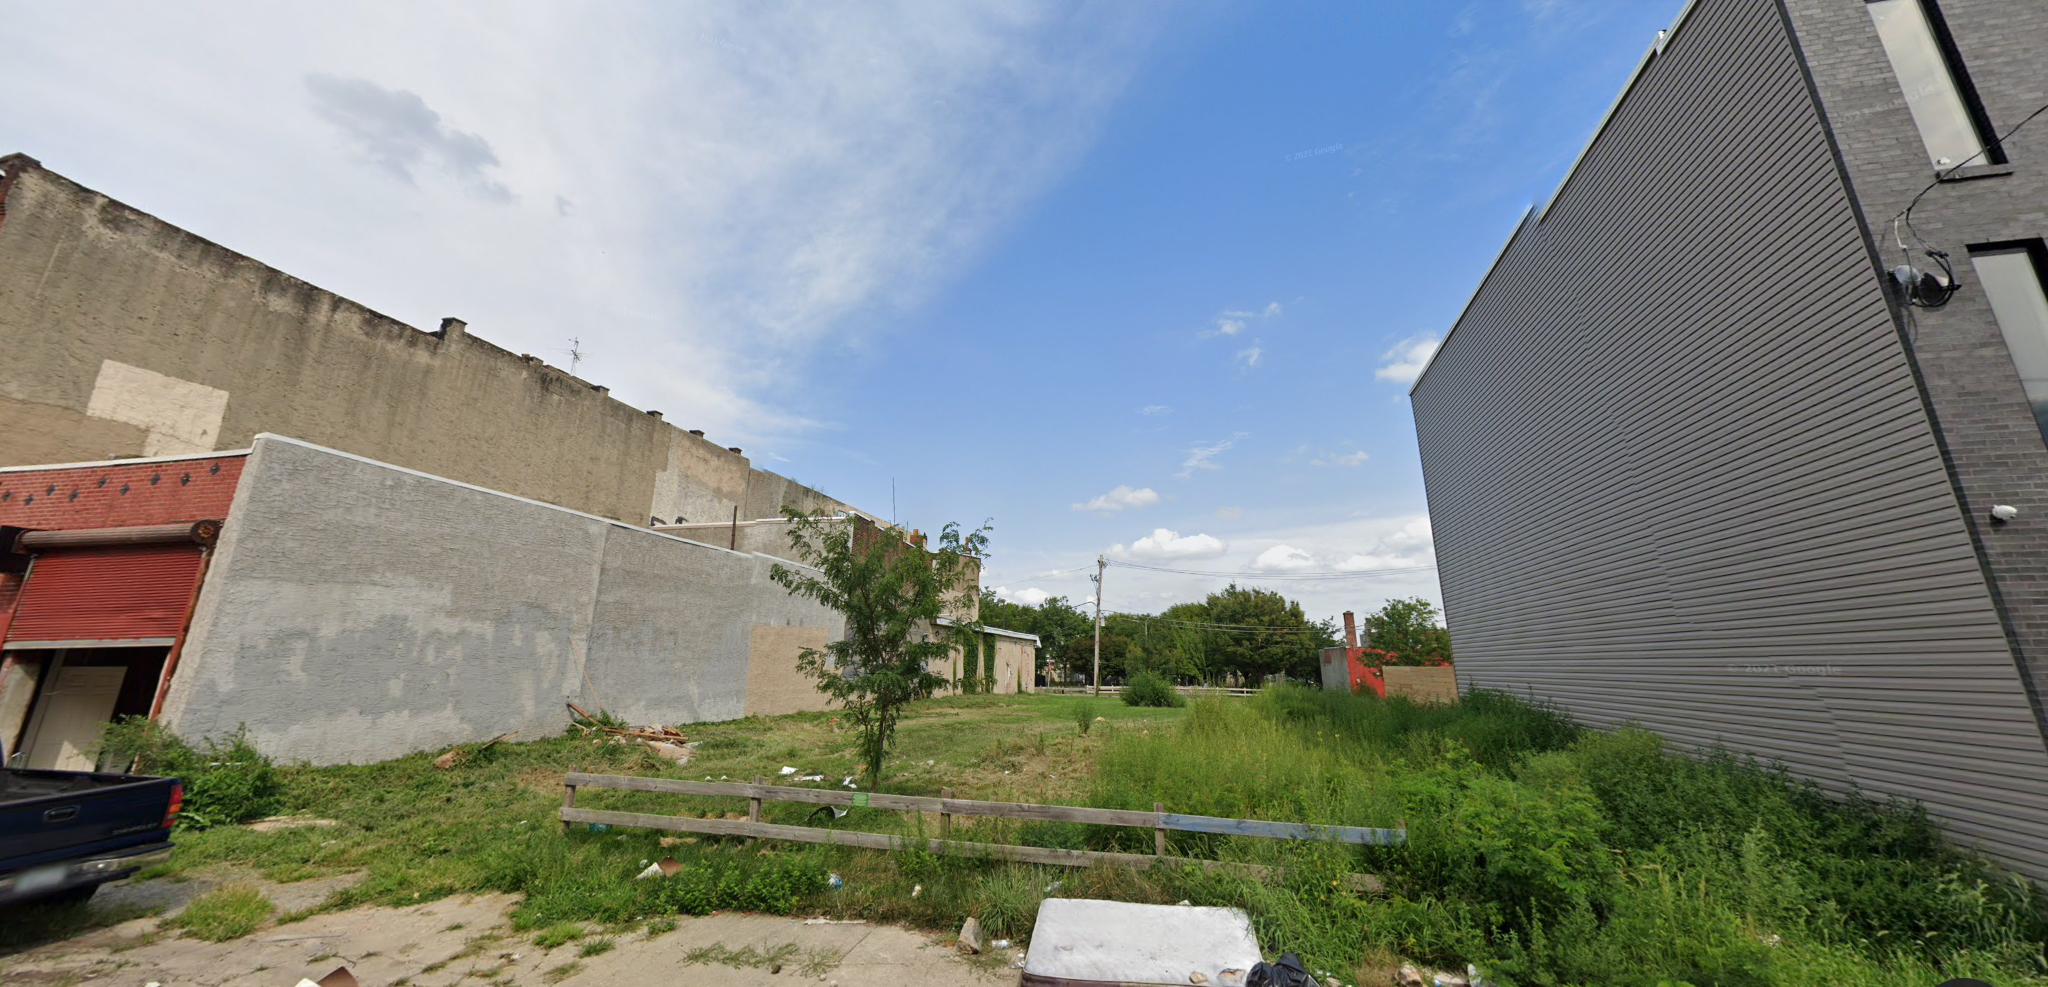 Current view of 2215 North 7th Street. Credit: Google.